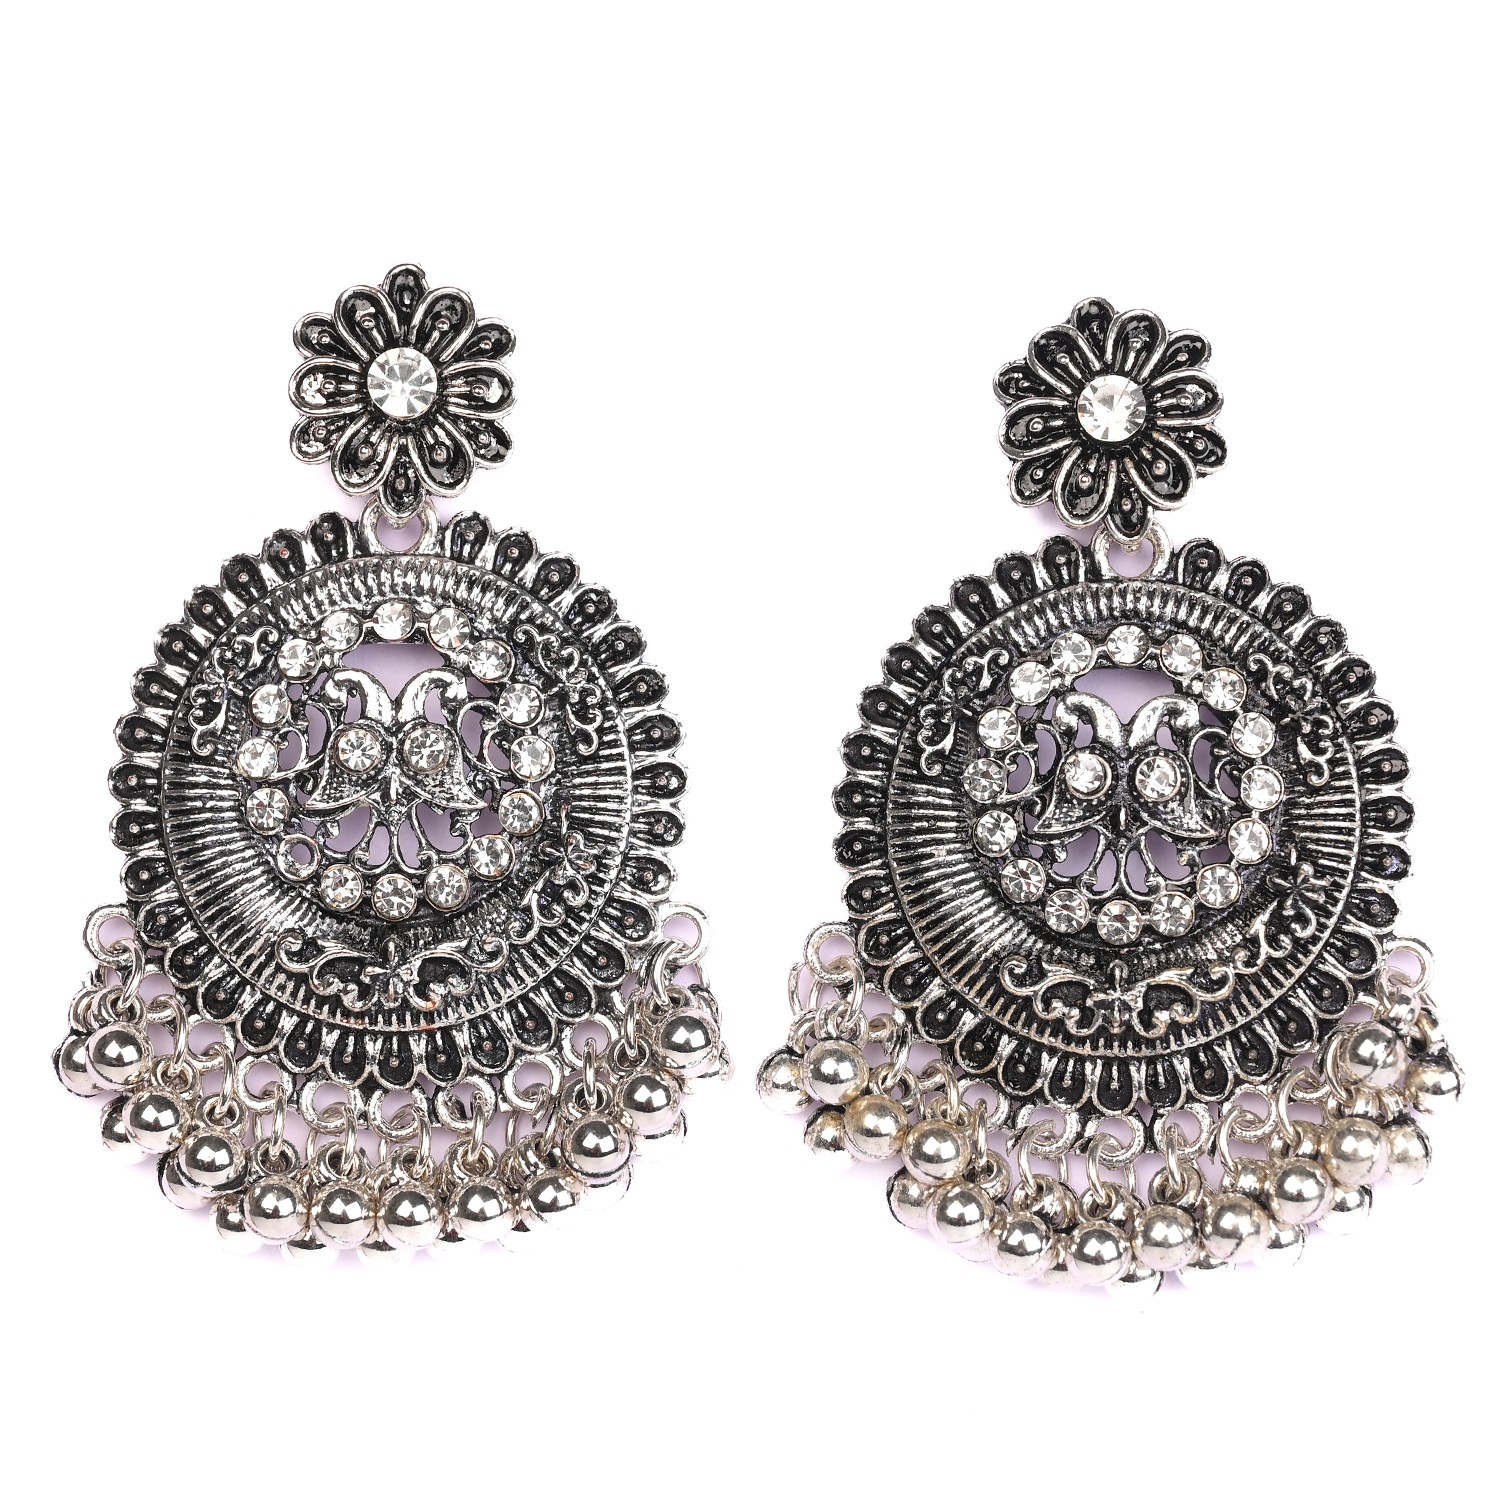 Jumka Earrings for Women - Exquisite Ethnic Elegance for All Occasions"